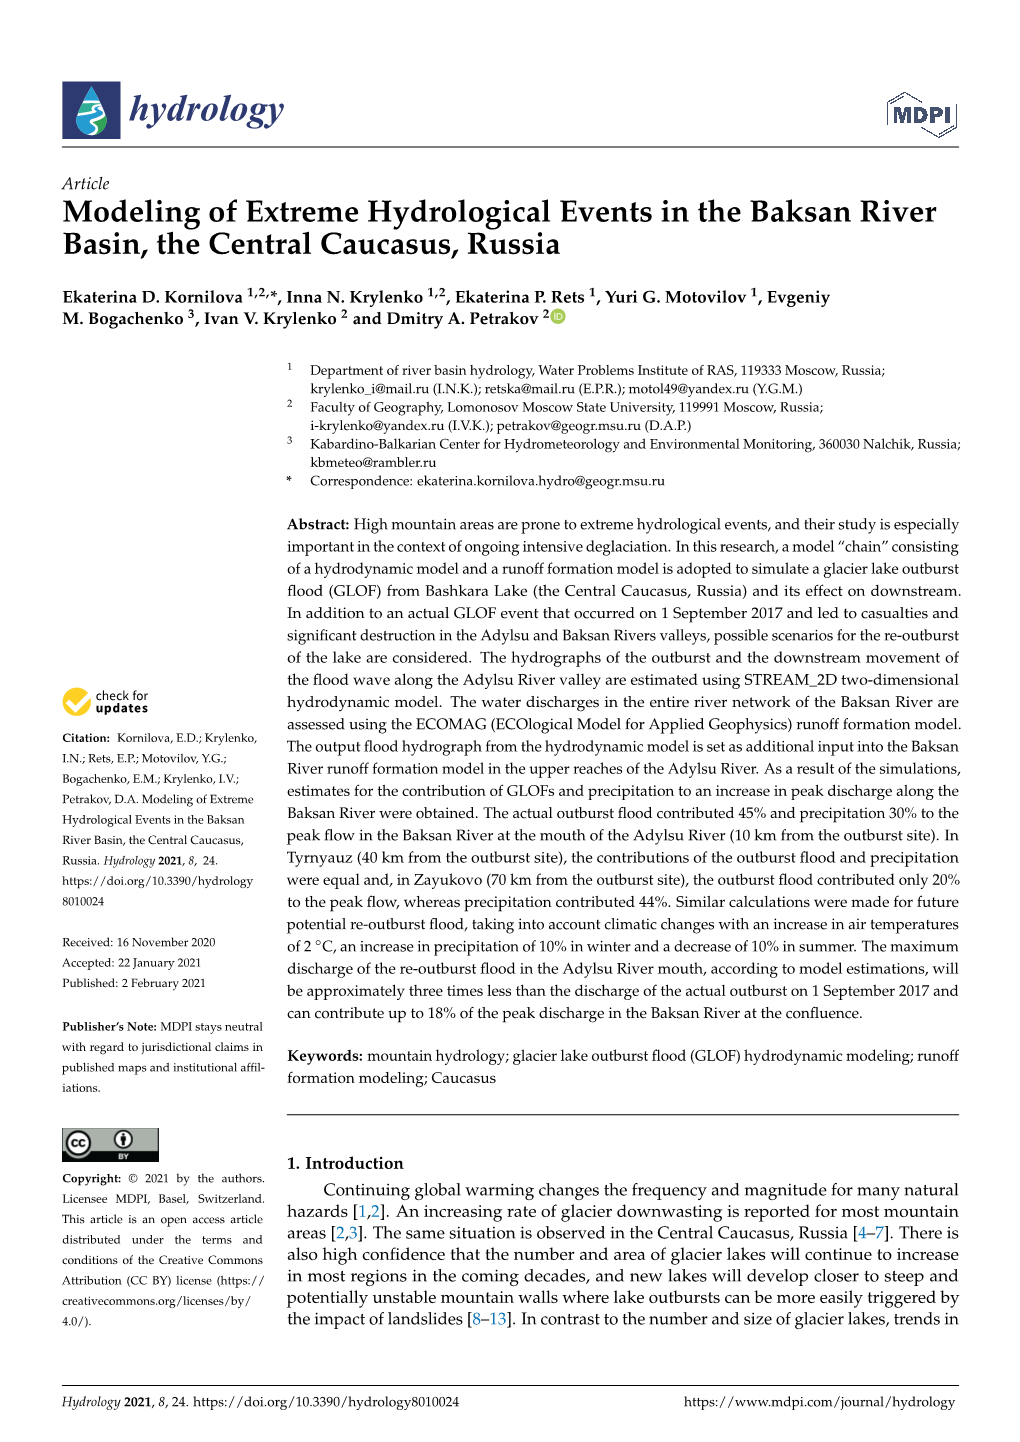 Modeling of Extreme Hydrological Events in the Baksan River Basin, the Central Caucasus, Russia